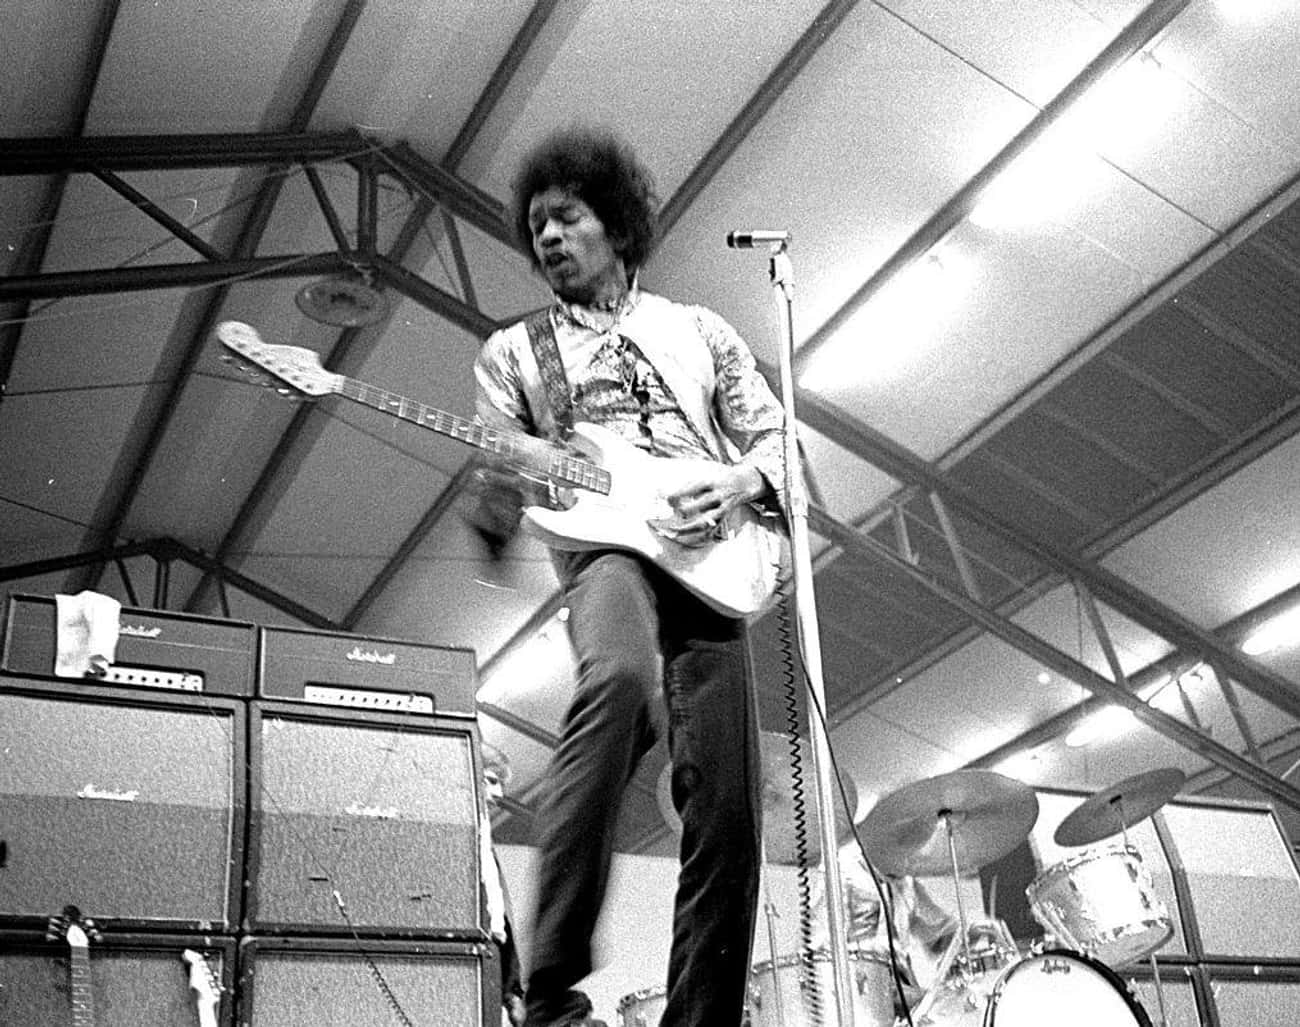 Jimi Hendrix Lit His Guitar On Fire At The Monterey Pop Festival